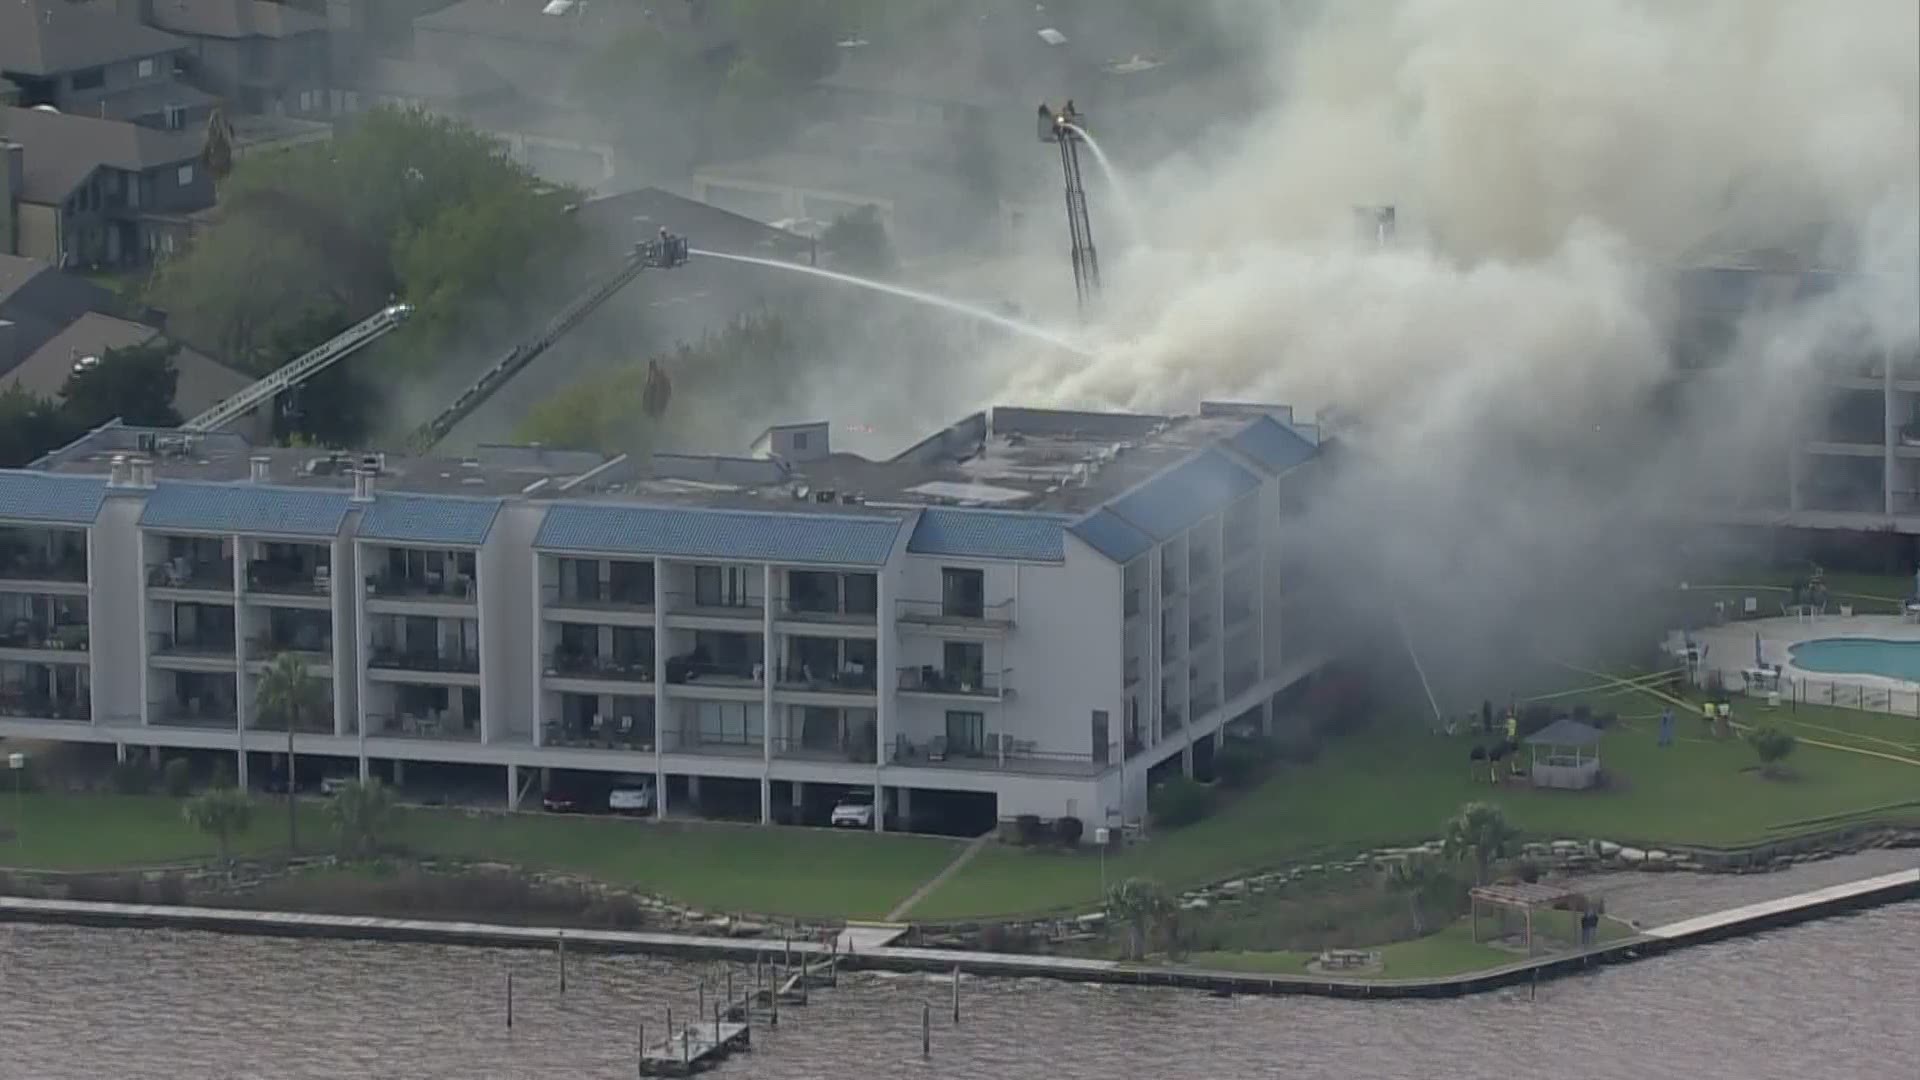 Firefighters spent over an hour battling a large fire at a condominium in Nassau Bay. No injuries were reported.